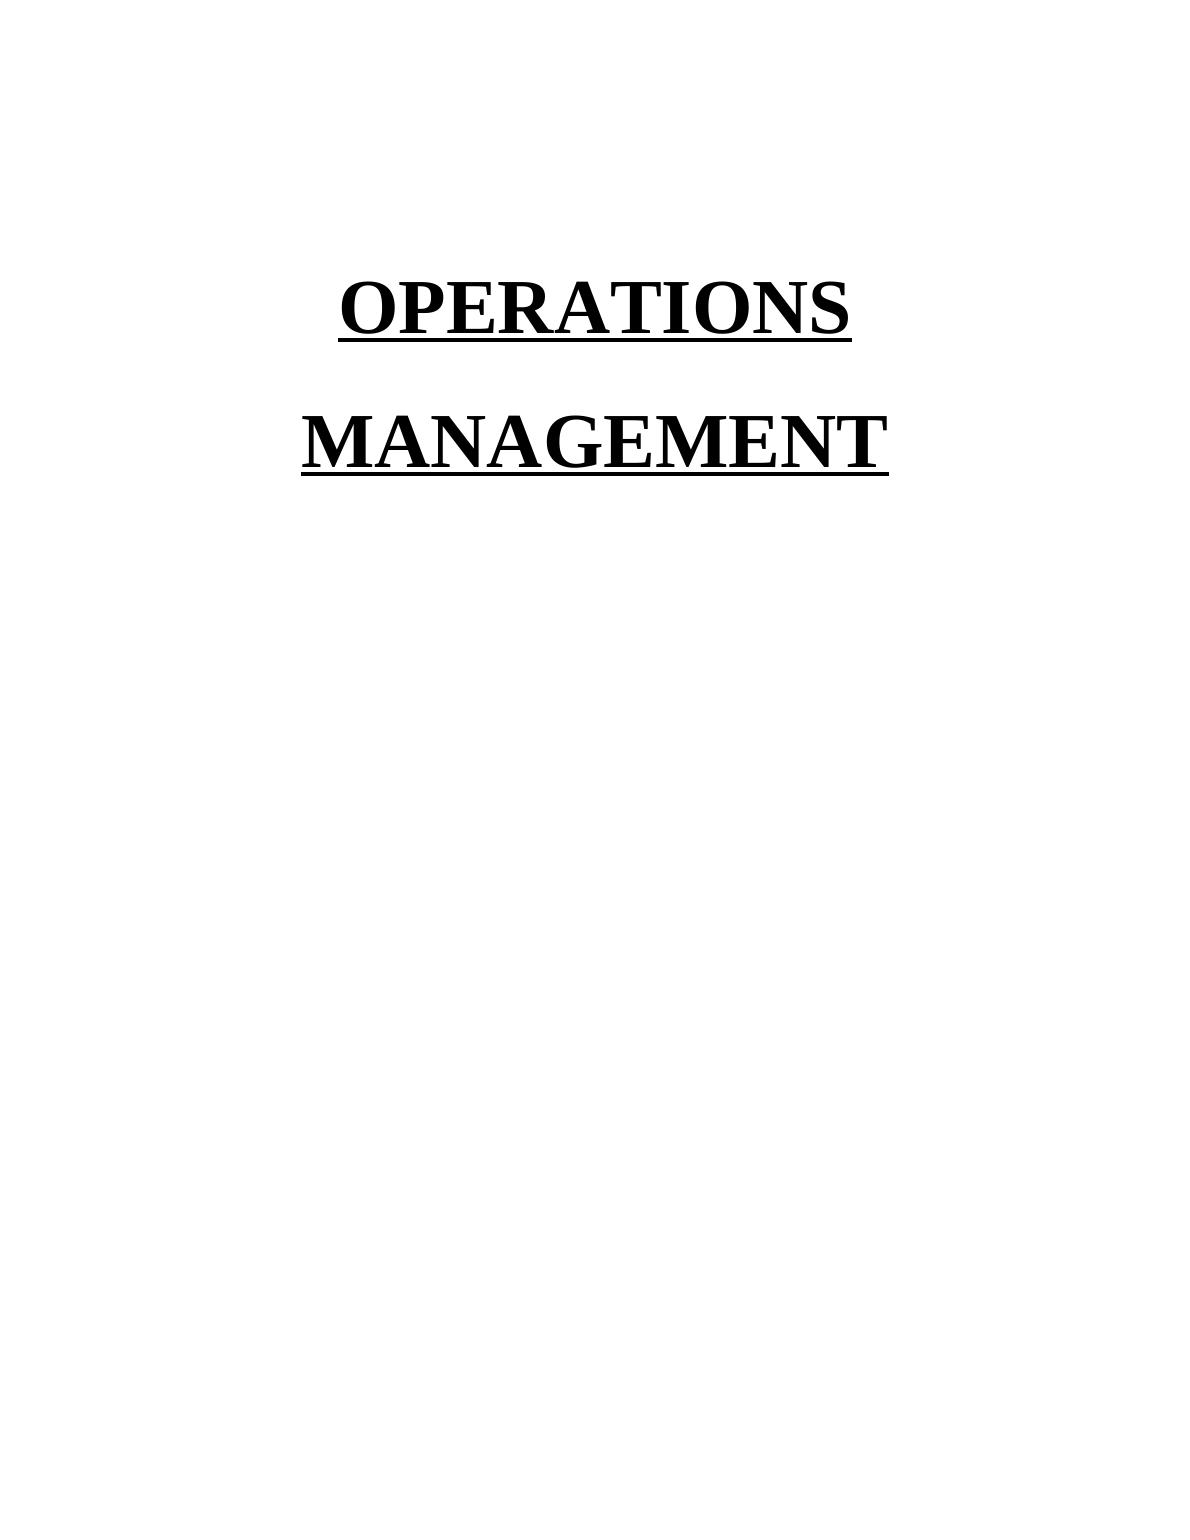 Operations Management in Tindo Solar Company_1